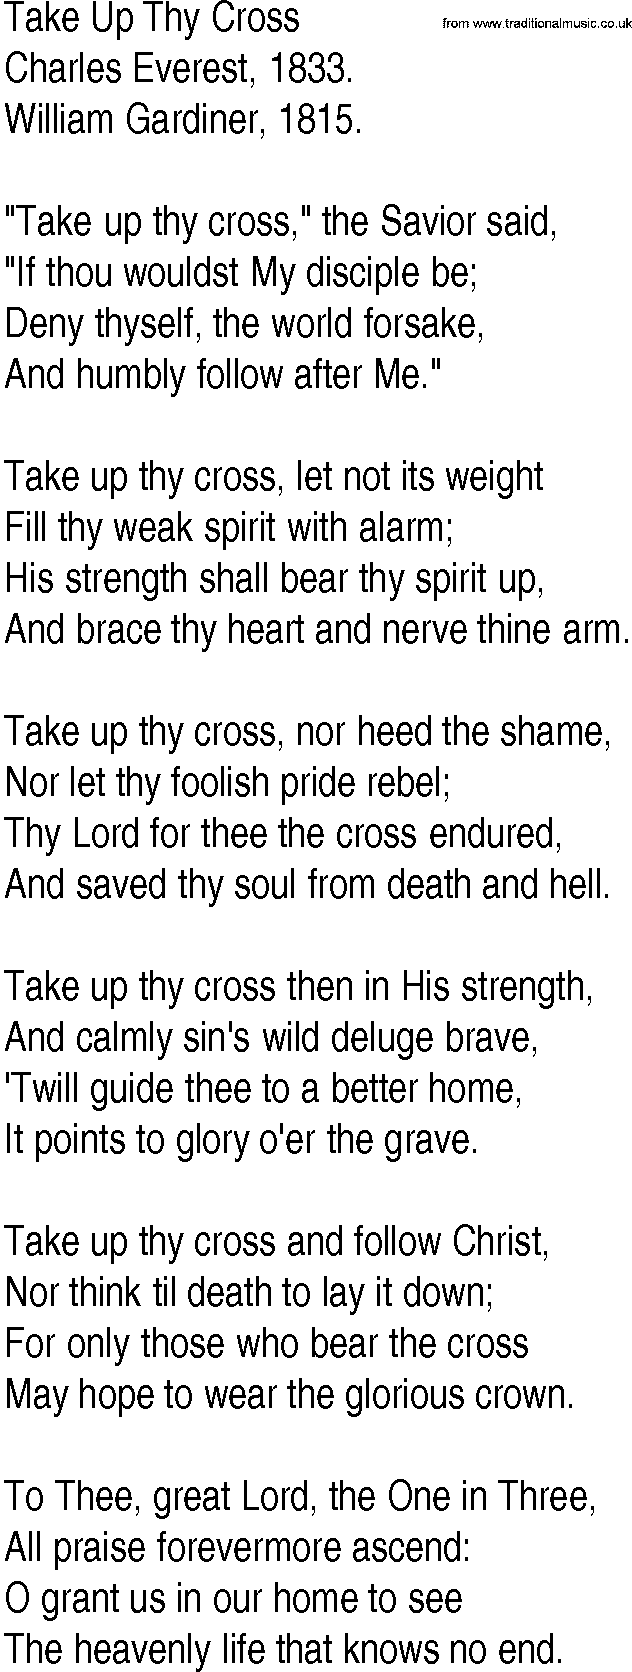 Hymn and Gospel Song: Take Up Thy Cross by Charles Everest lyrics